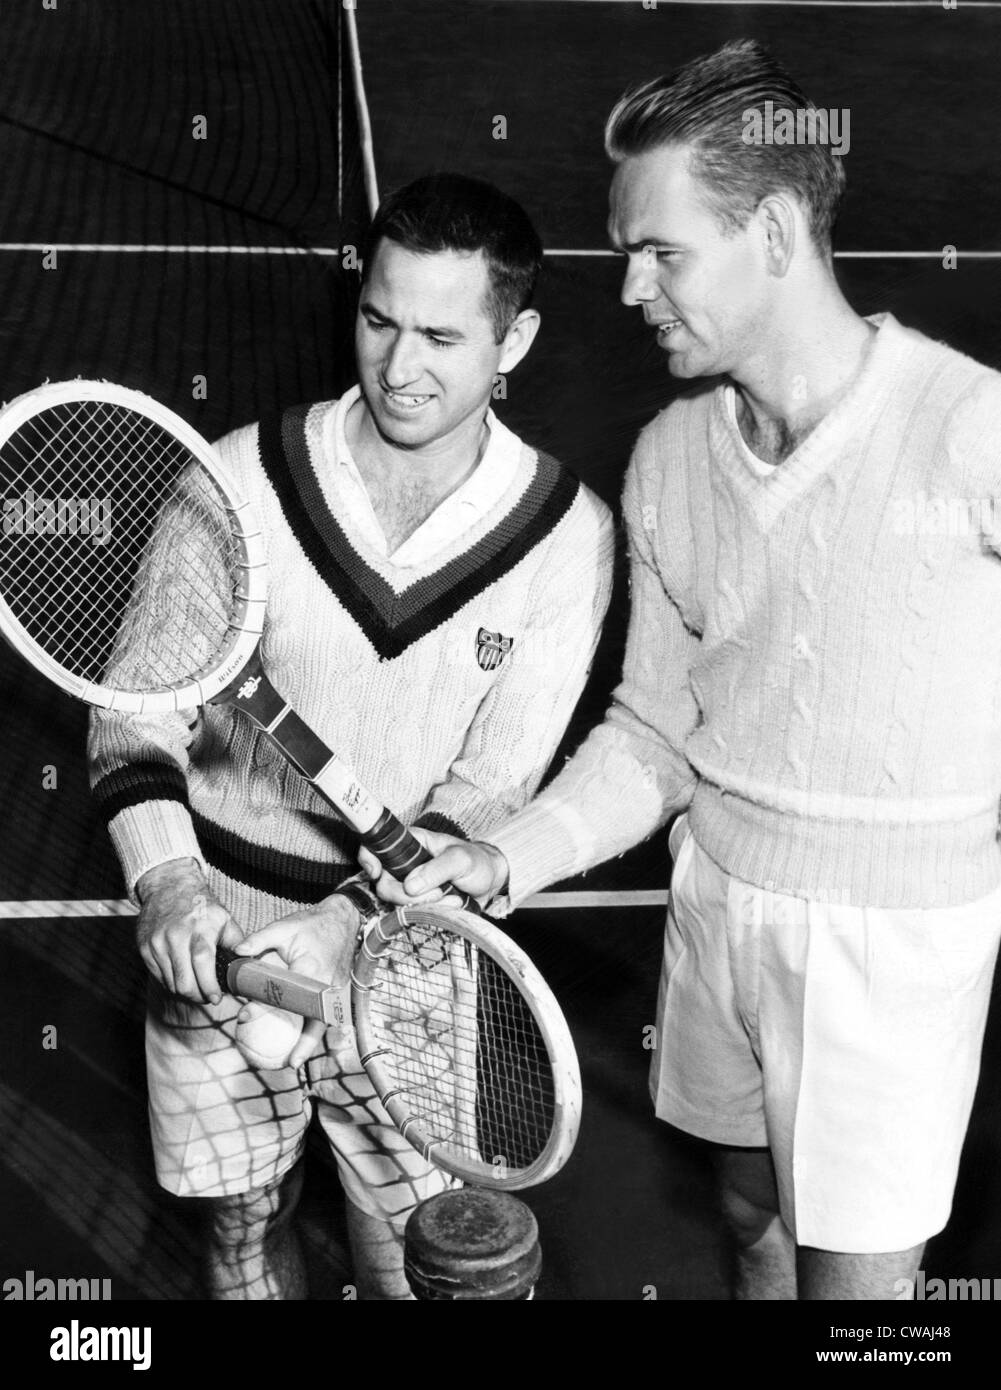 Tennis players Bobby Riggs, Jack Kramer, c. 1950s.. Courtesy: CSU Archives / Everett Collection Stock Photo